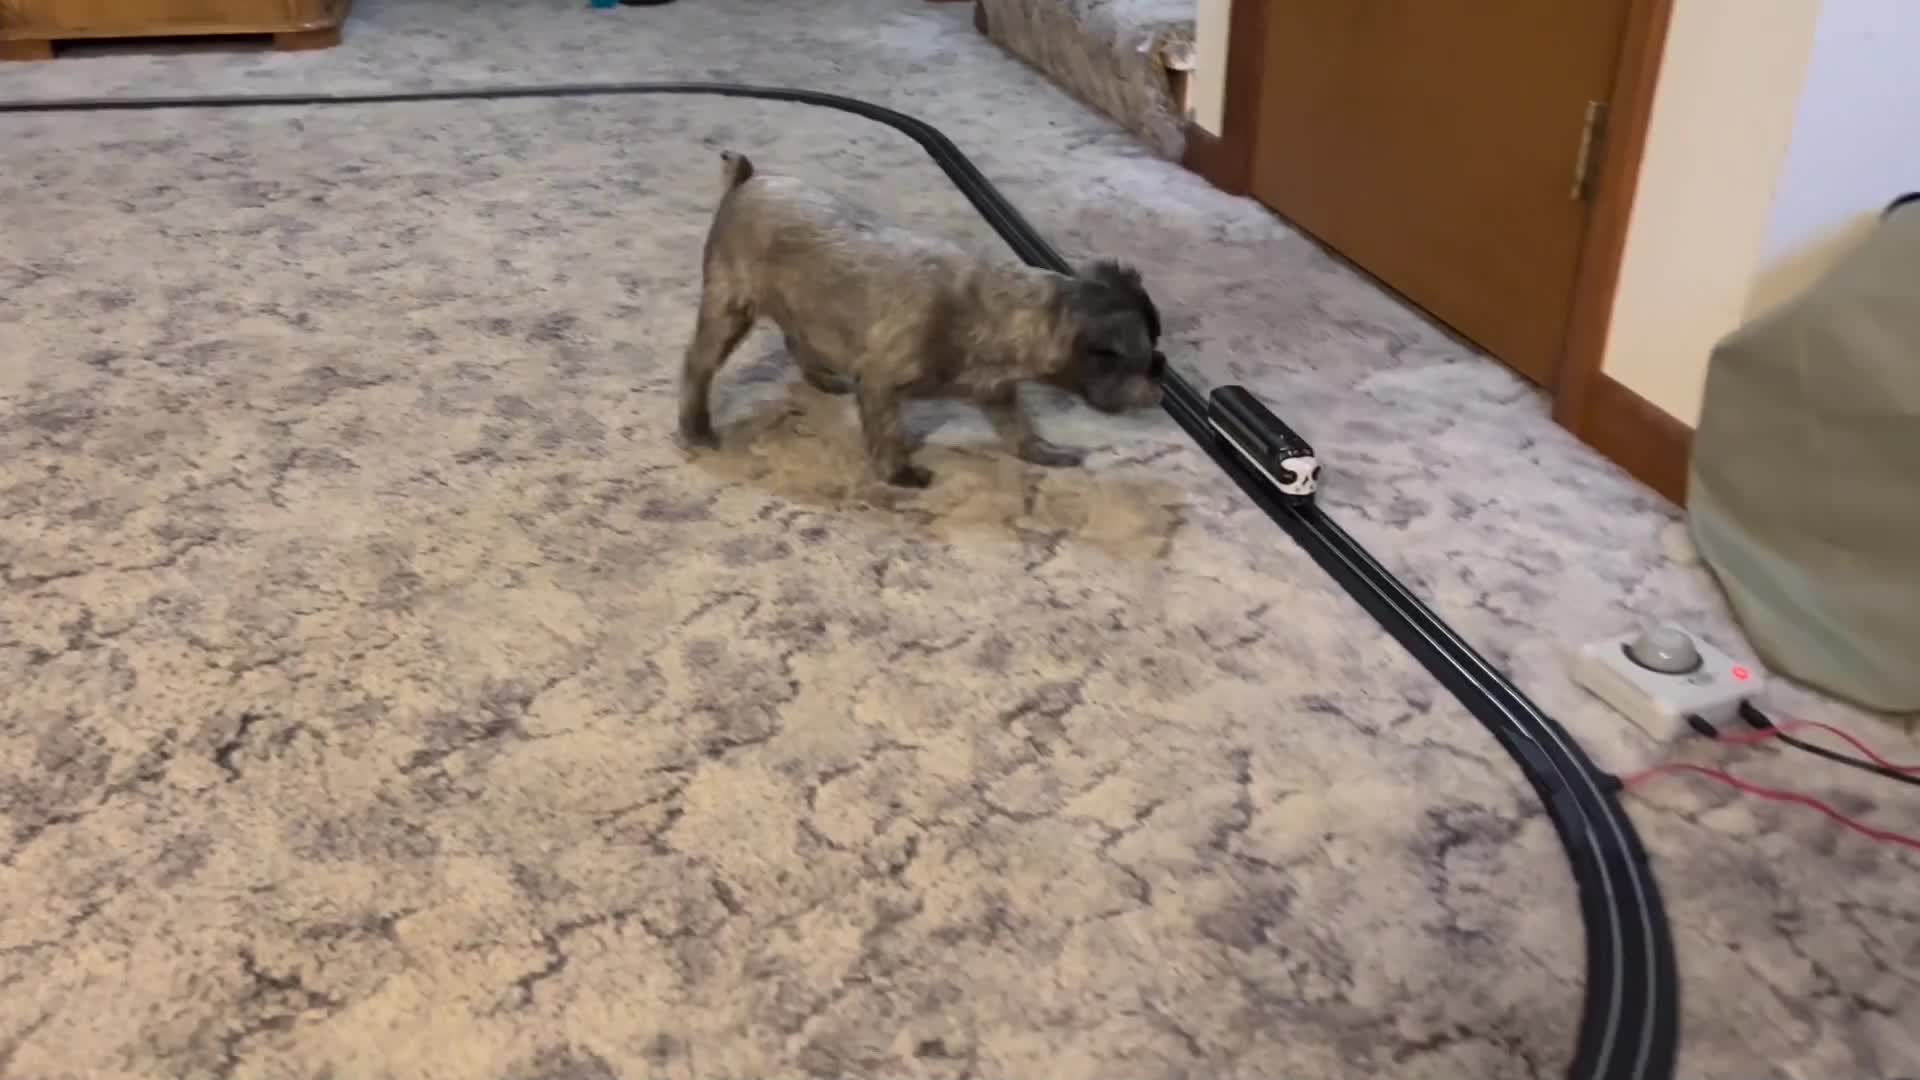 Puppy Tries to Stop Toy Train